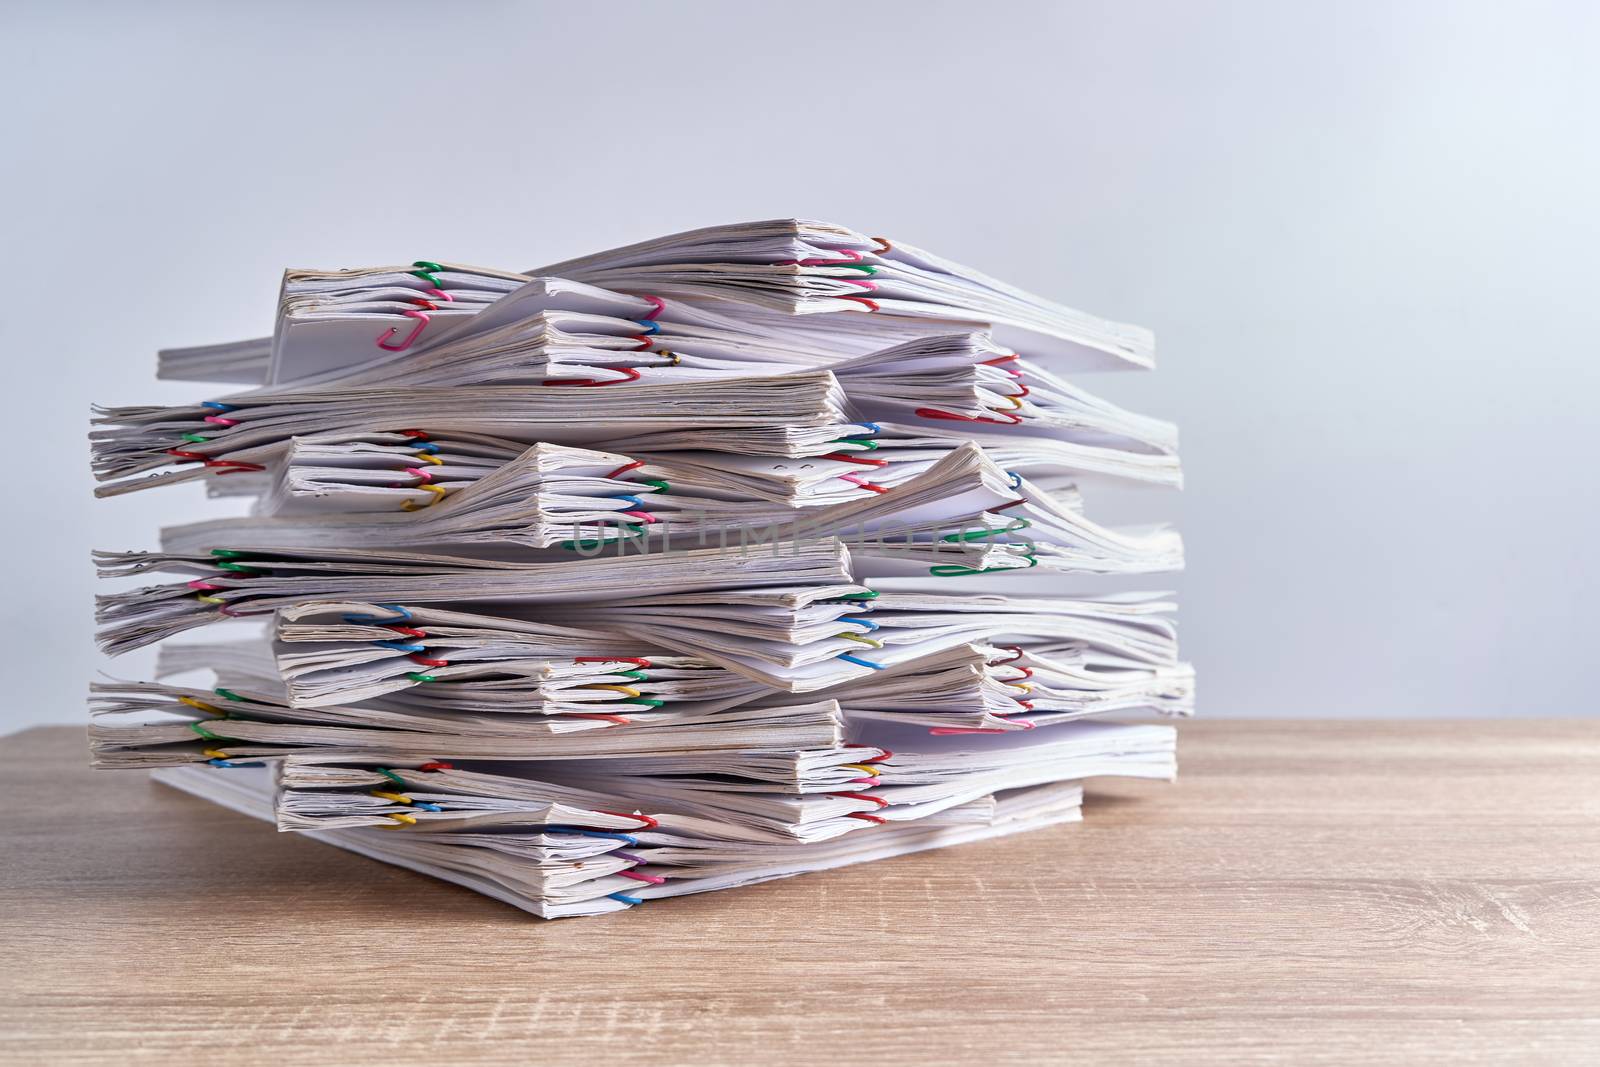 Pile overload document of report of sale and receipt with colorful paperclip place on wood table and white background with copy space. Business and finance concepts successful photography.